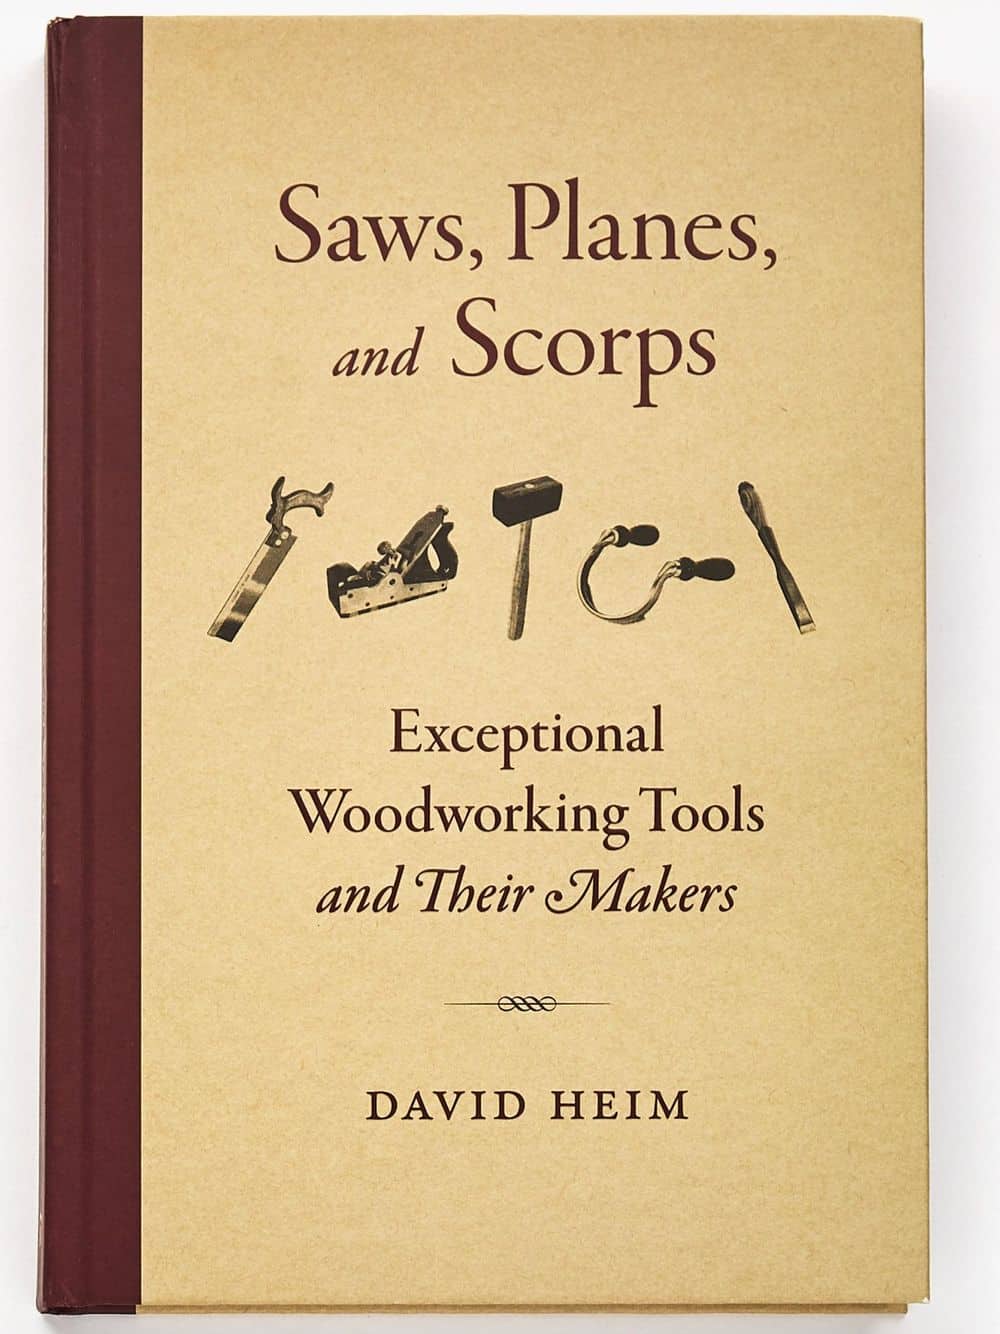 Saws, Planes, and Scorps: Exceptional Woodworking Tools and Their Makers